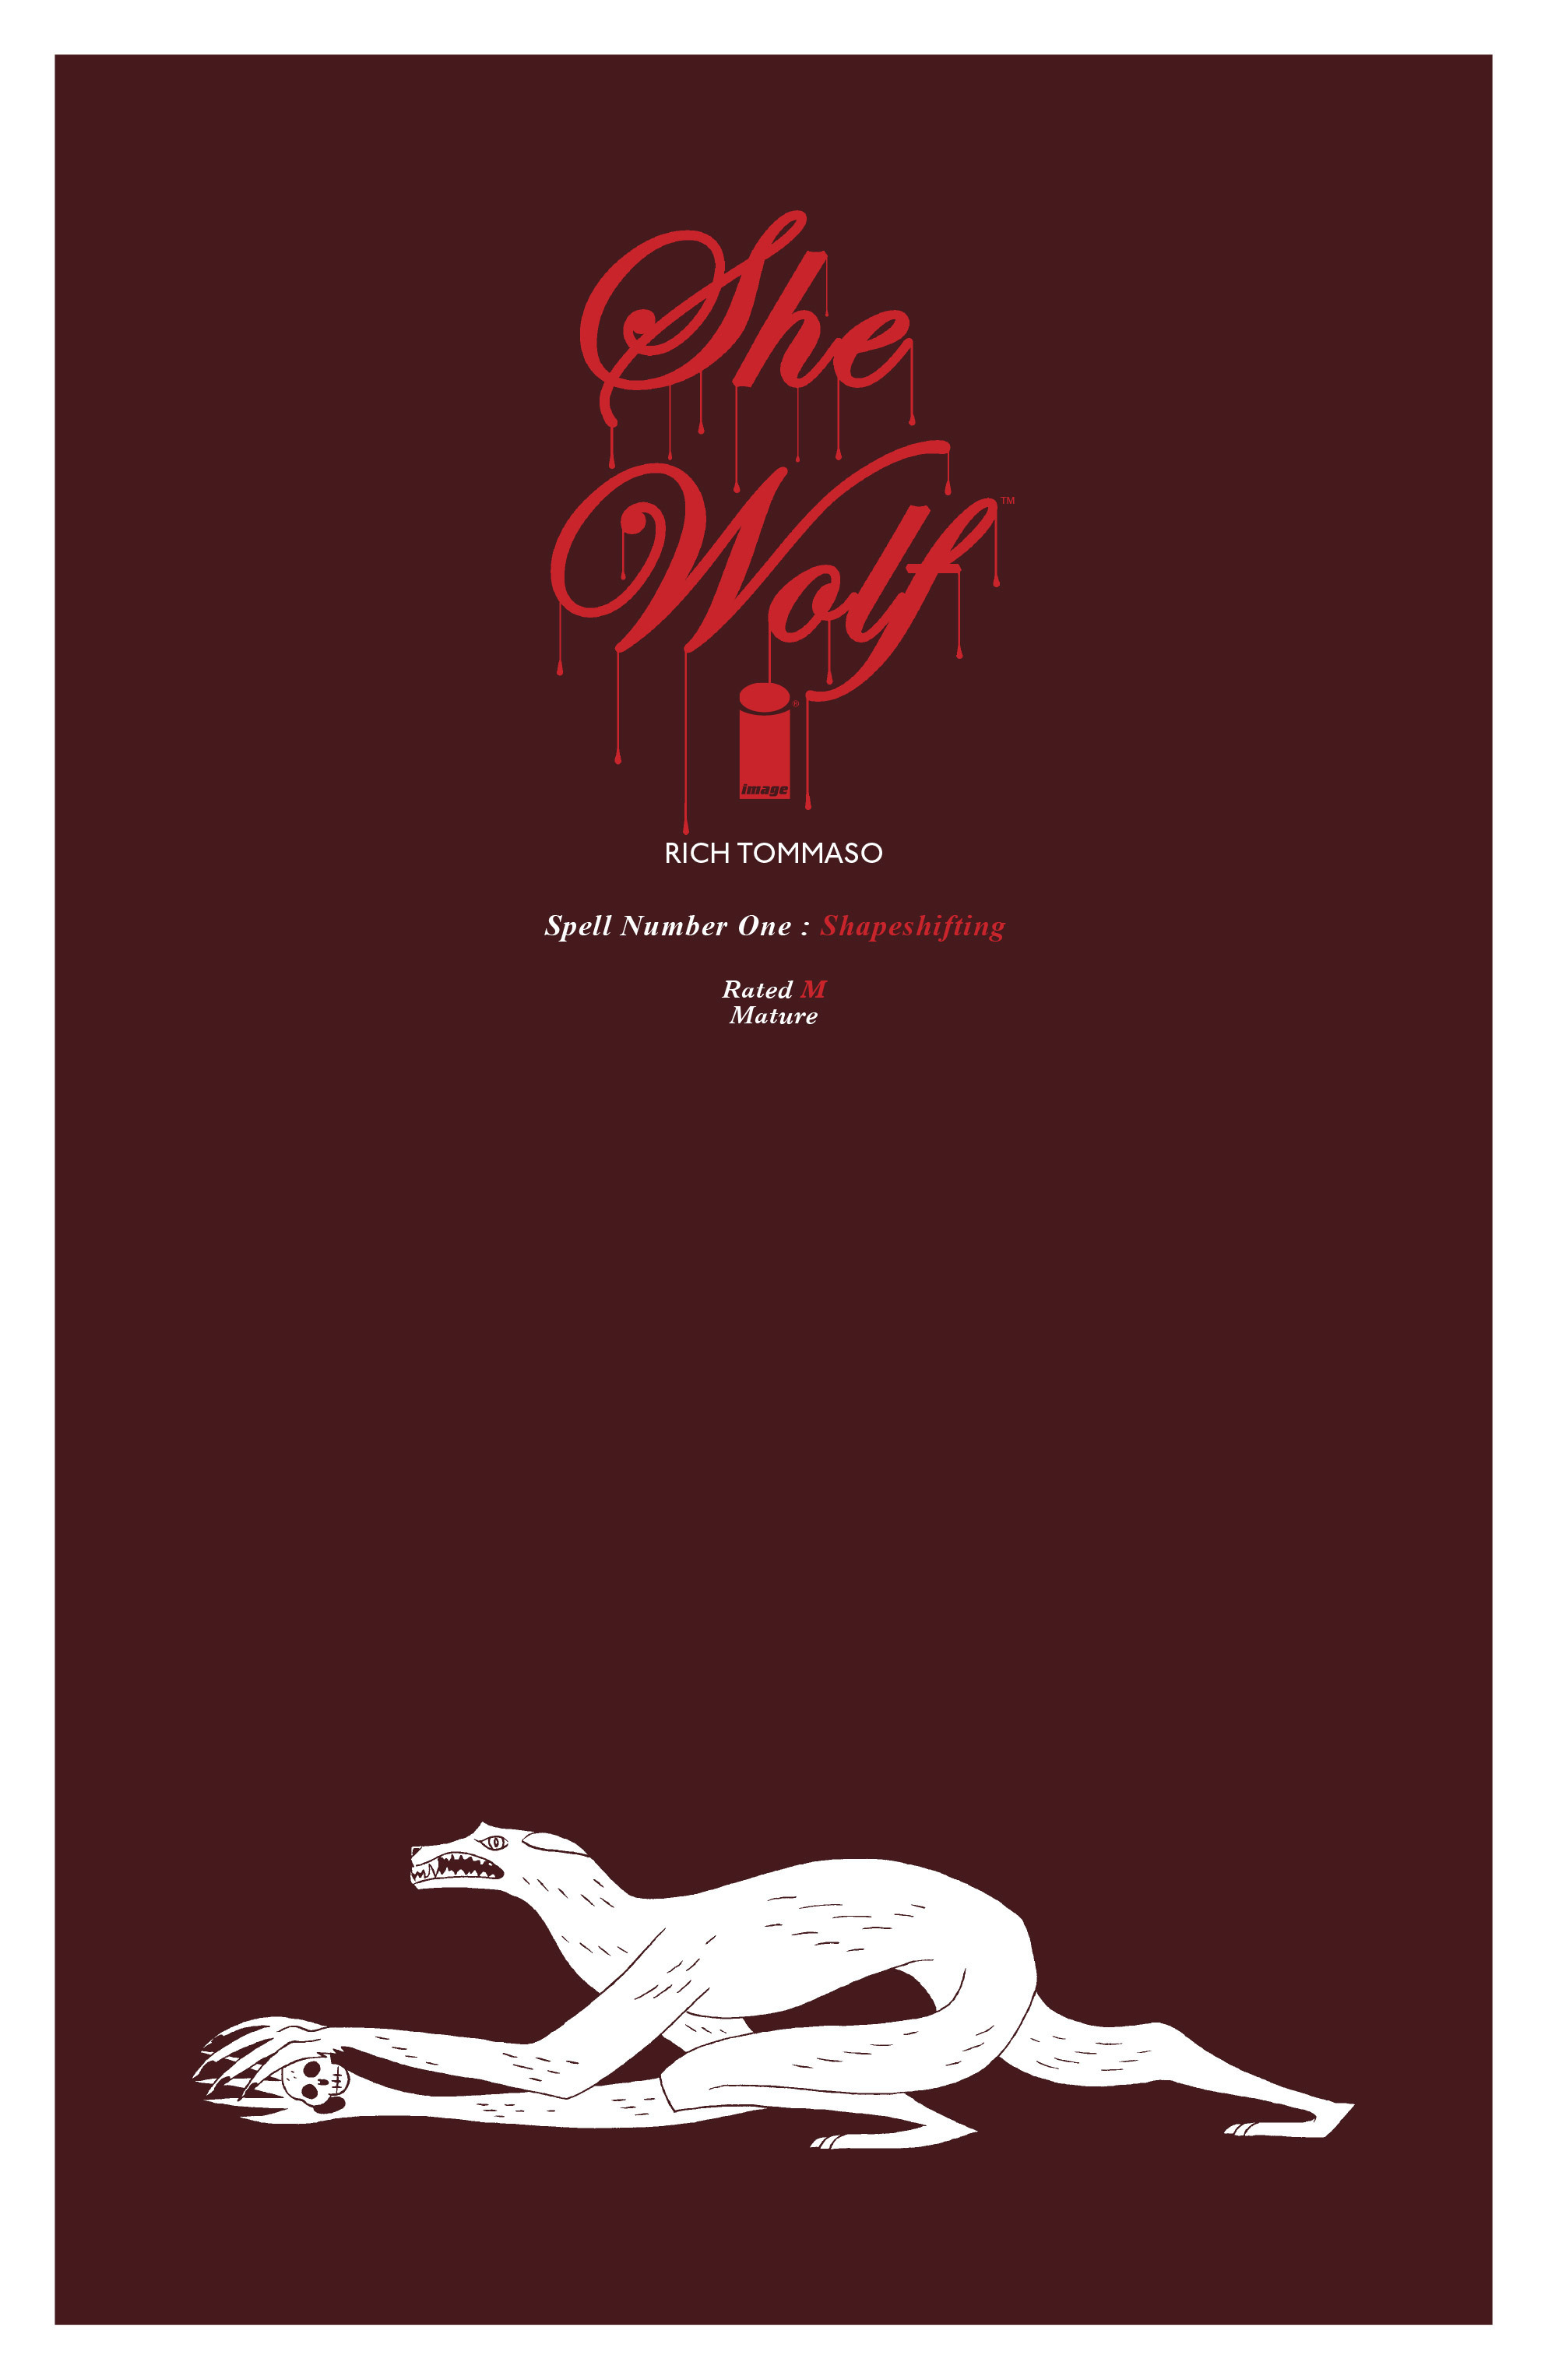 Read online She Wolf comic -  Issue #1 - 1